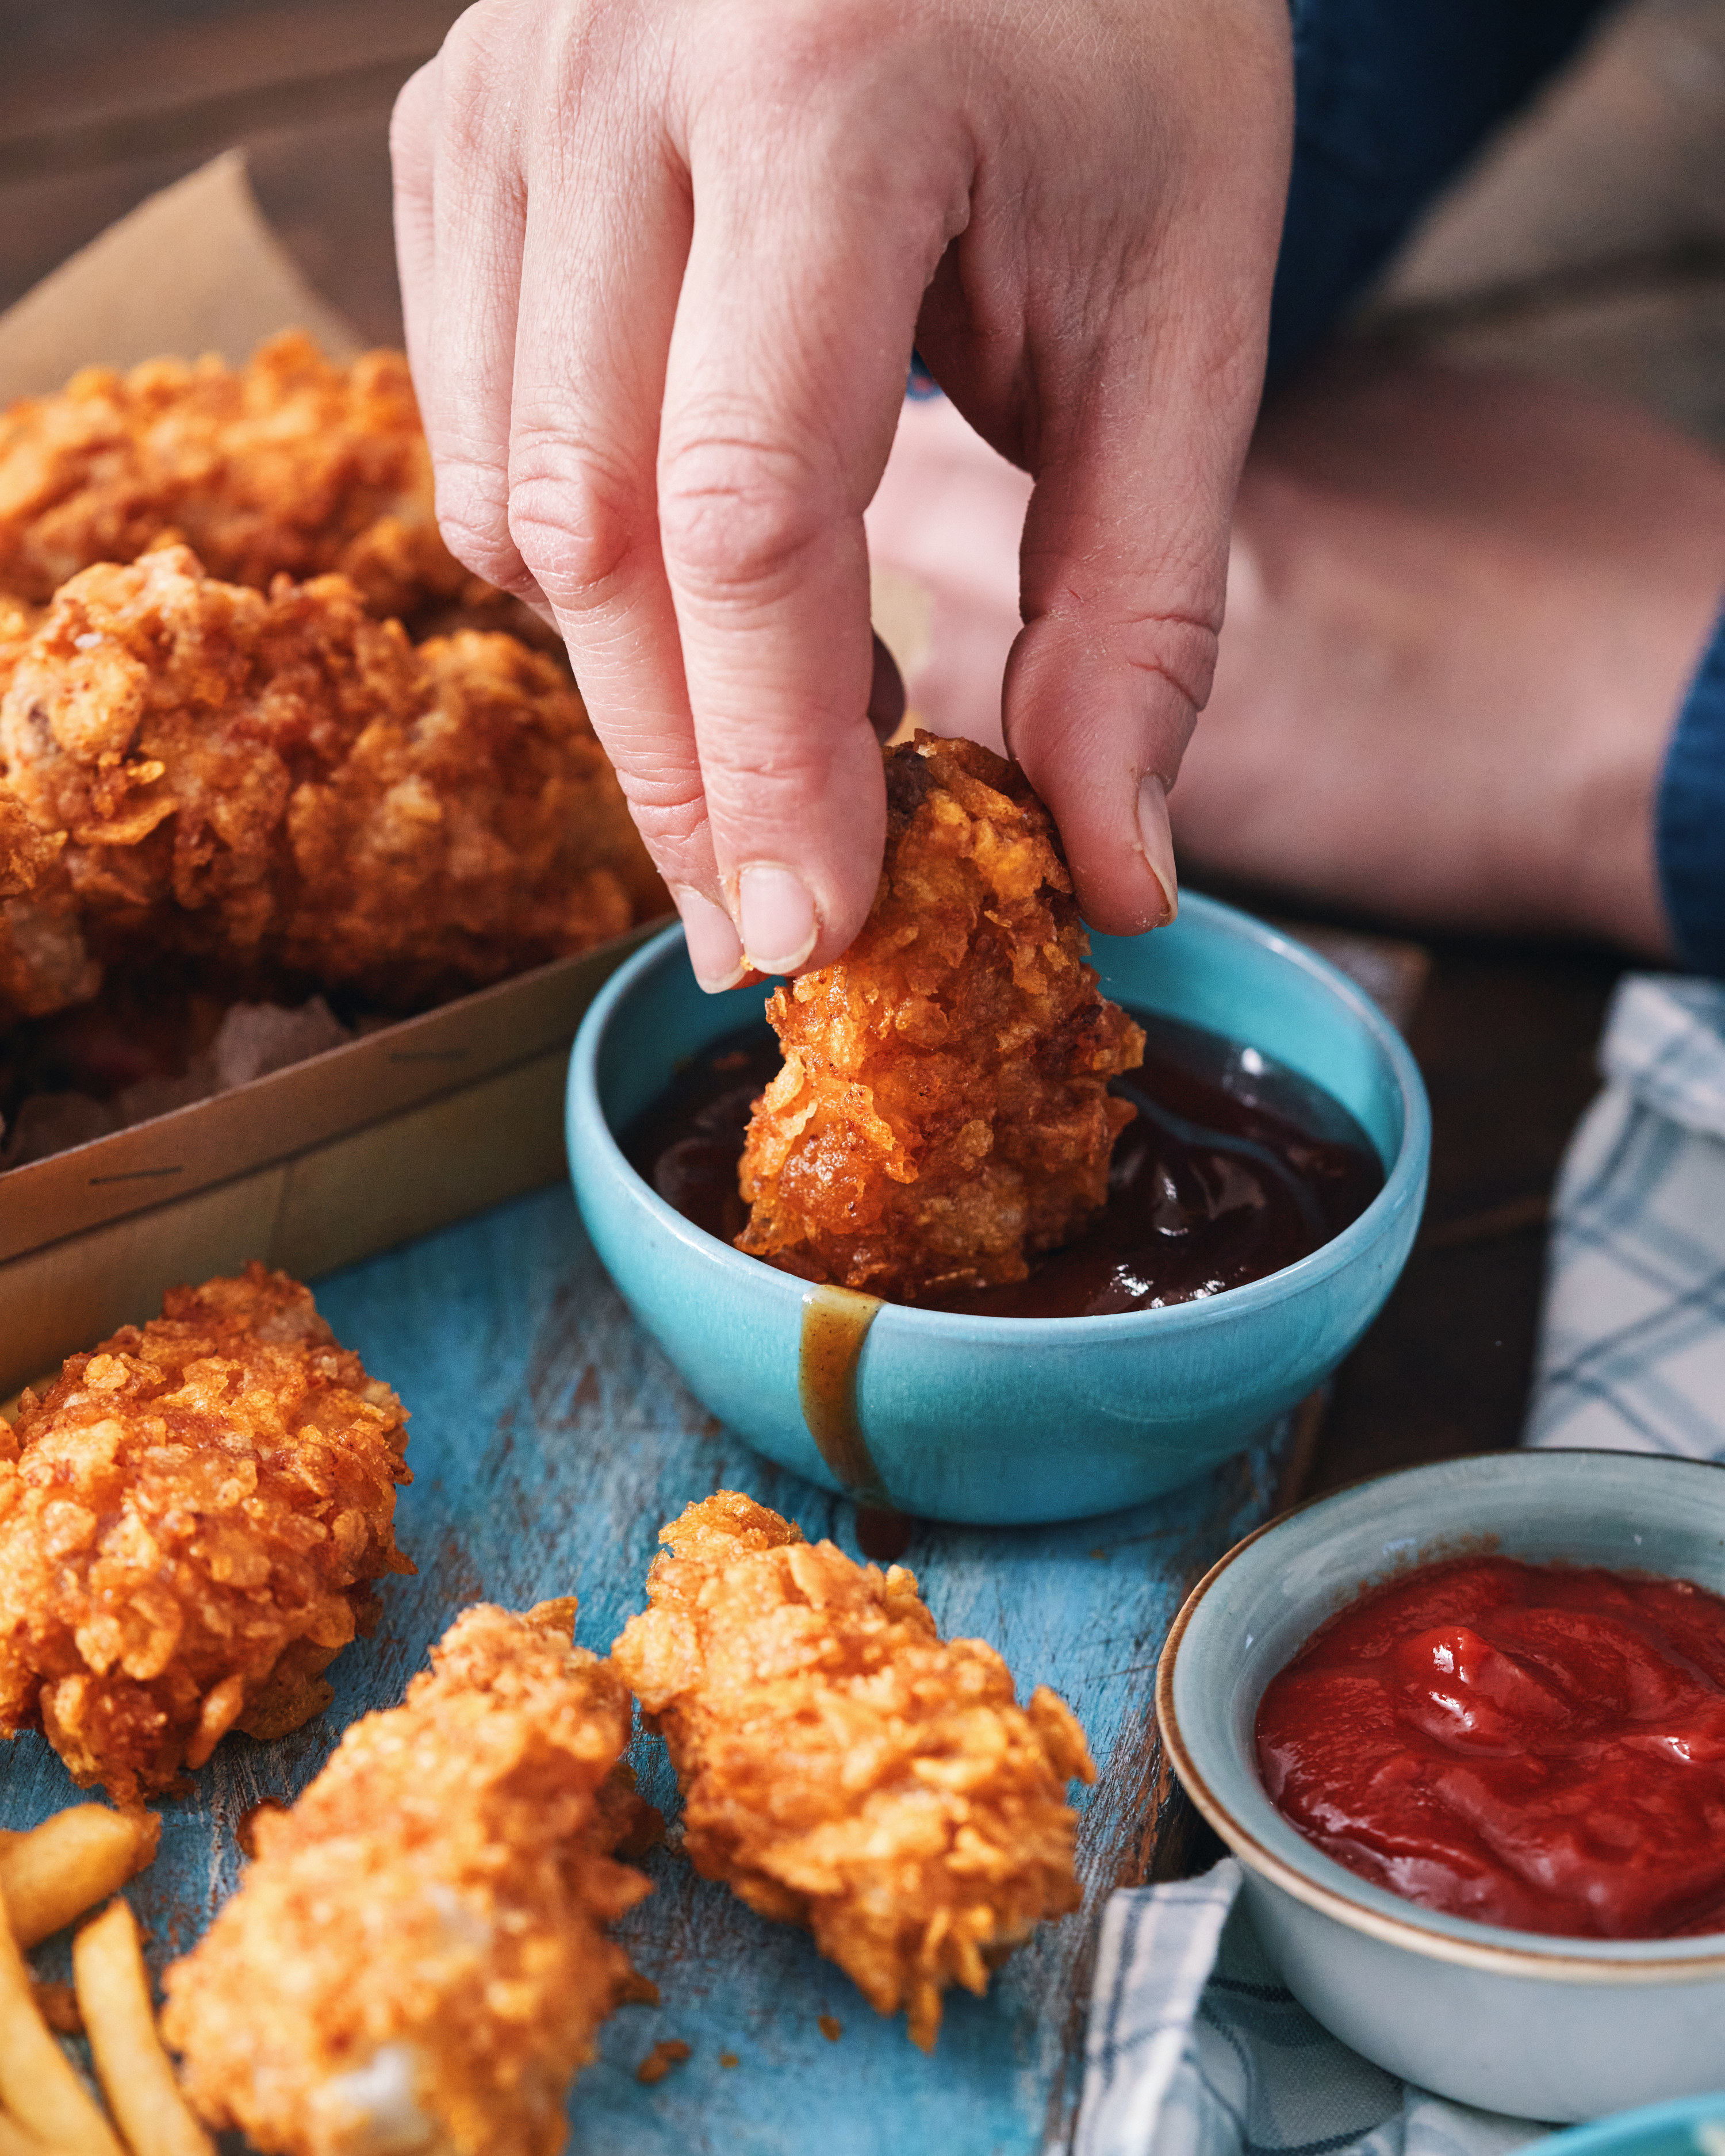 An image of a person&#x27;s hand dipped a piece of fried chicken into a small blue bowl of barbeque sauce.